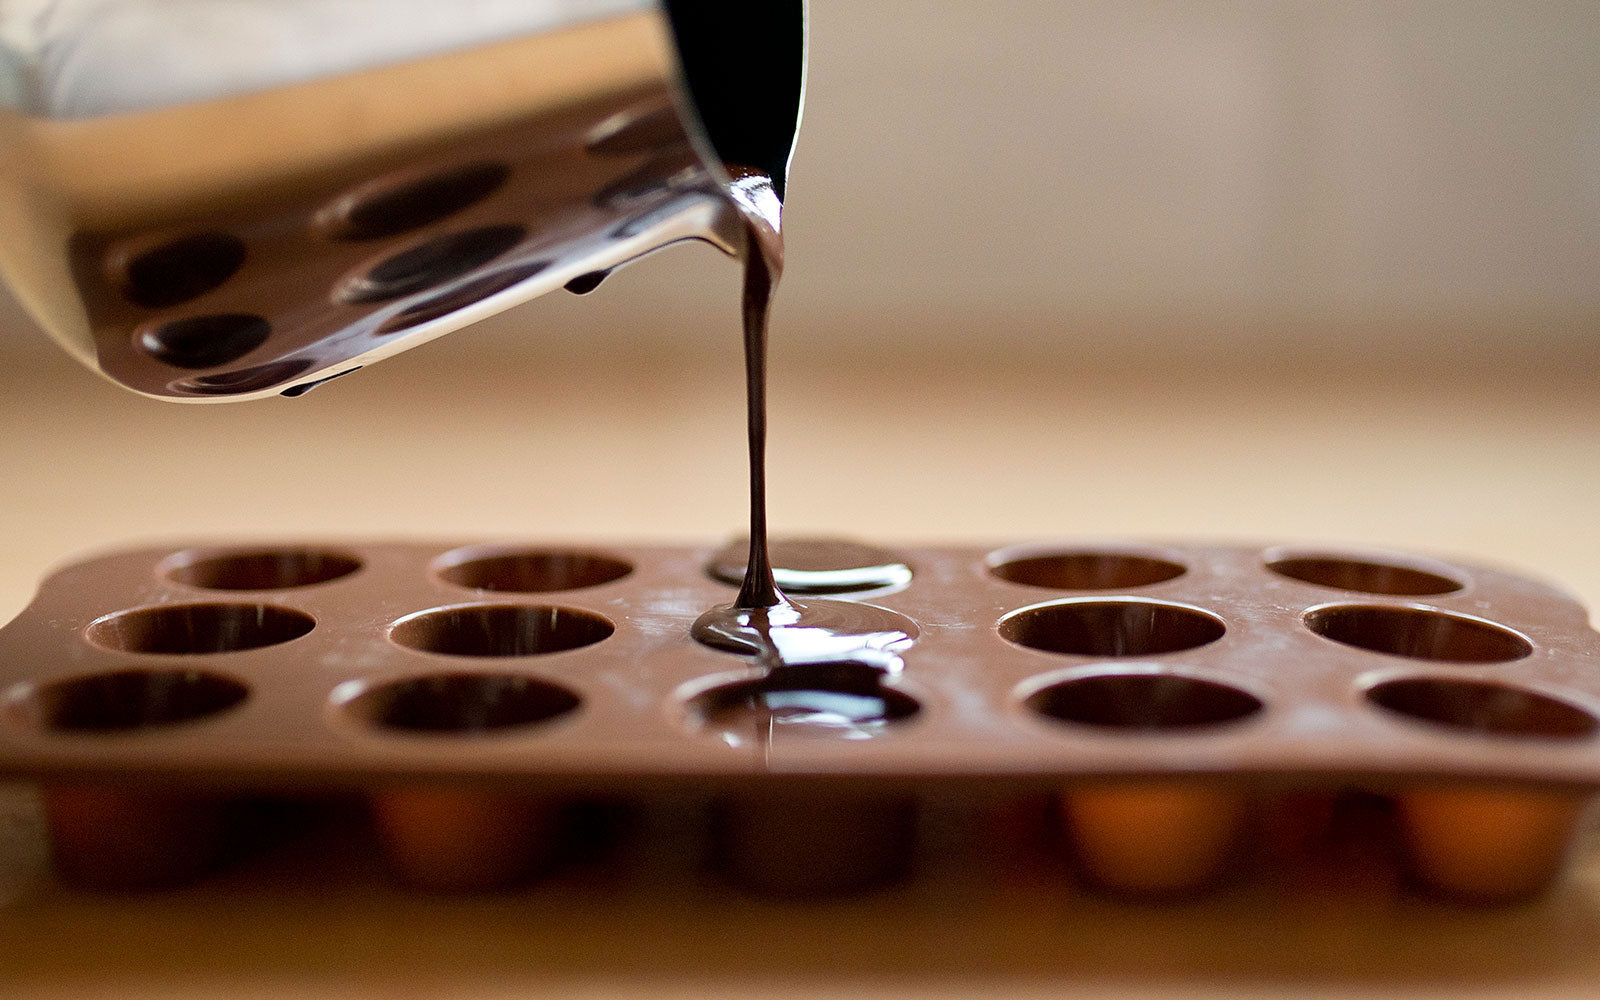 pouring raw chocolate